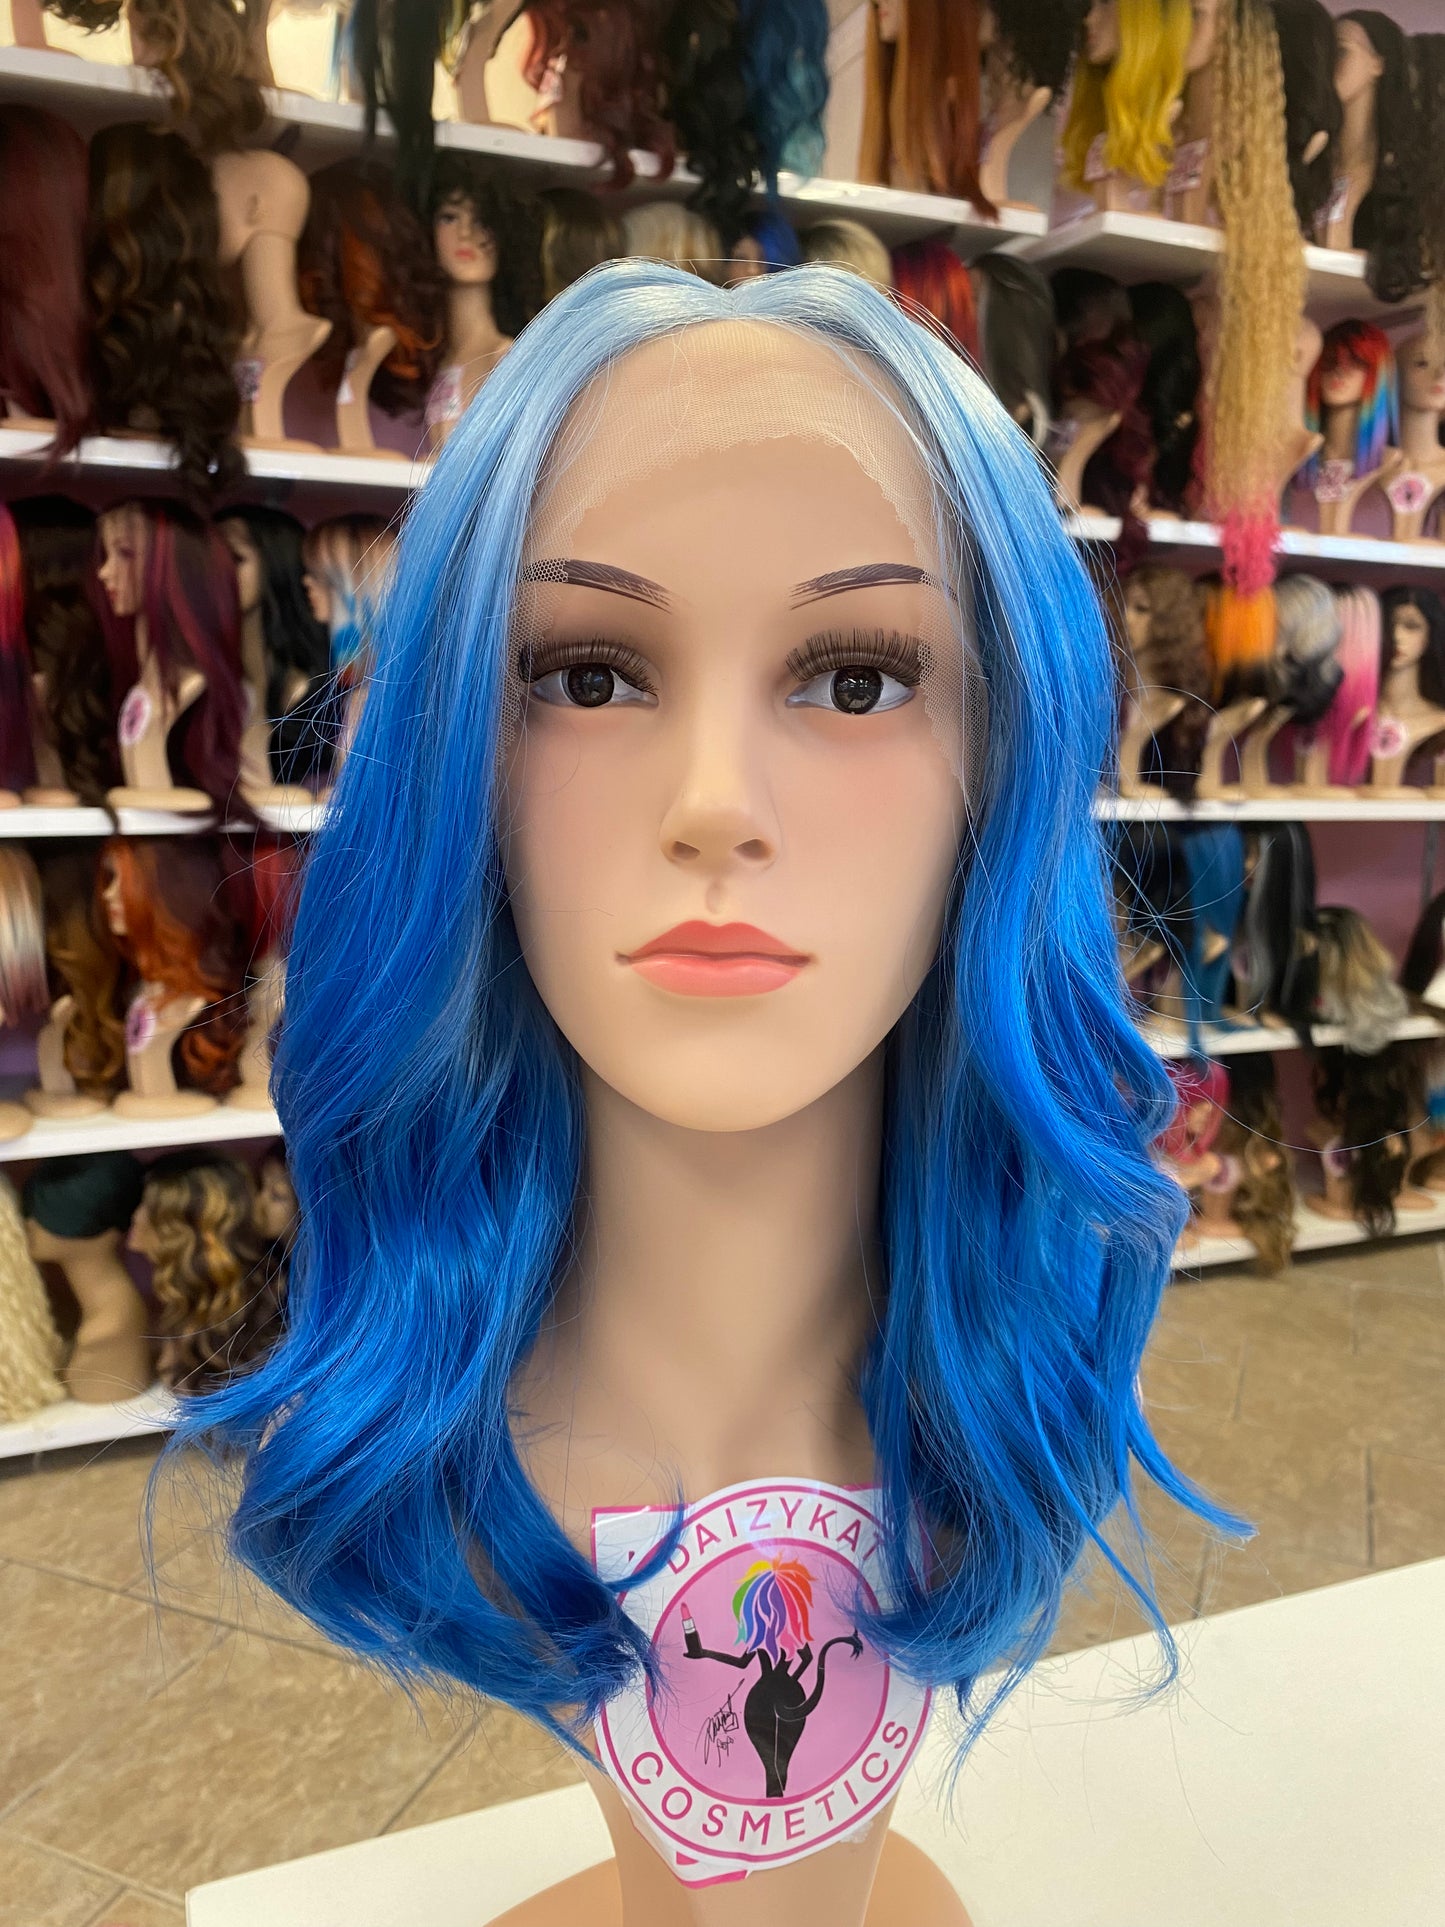 329 Holly - Middle Part Lace Front Wig - AQUABLUE - DaizyKat Cosmetics 329 Holly - Middle Part Lace Front Wig - AQUABLUE DaizyKat Cosmetics Wigs